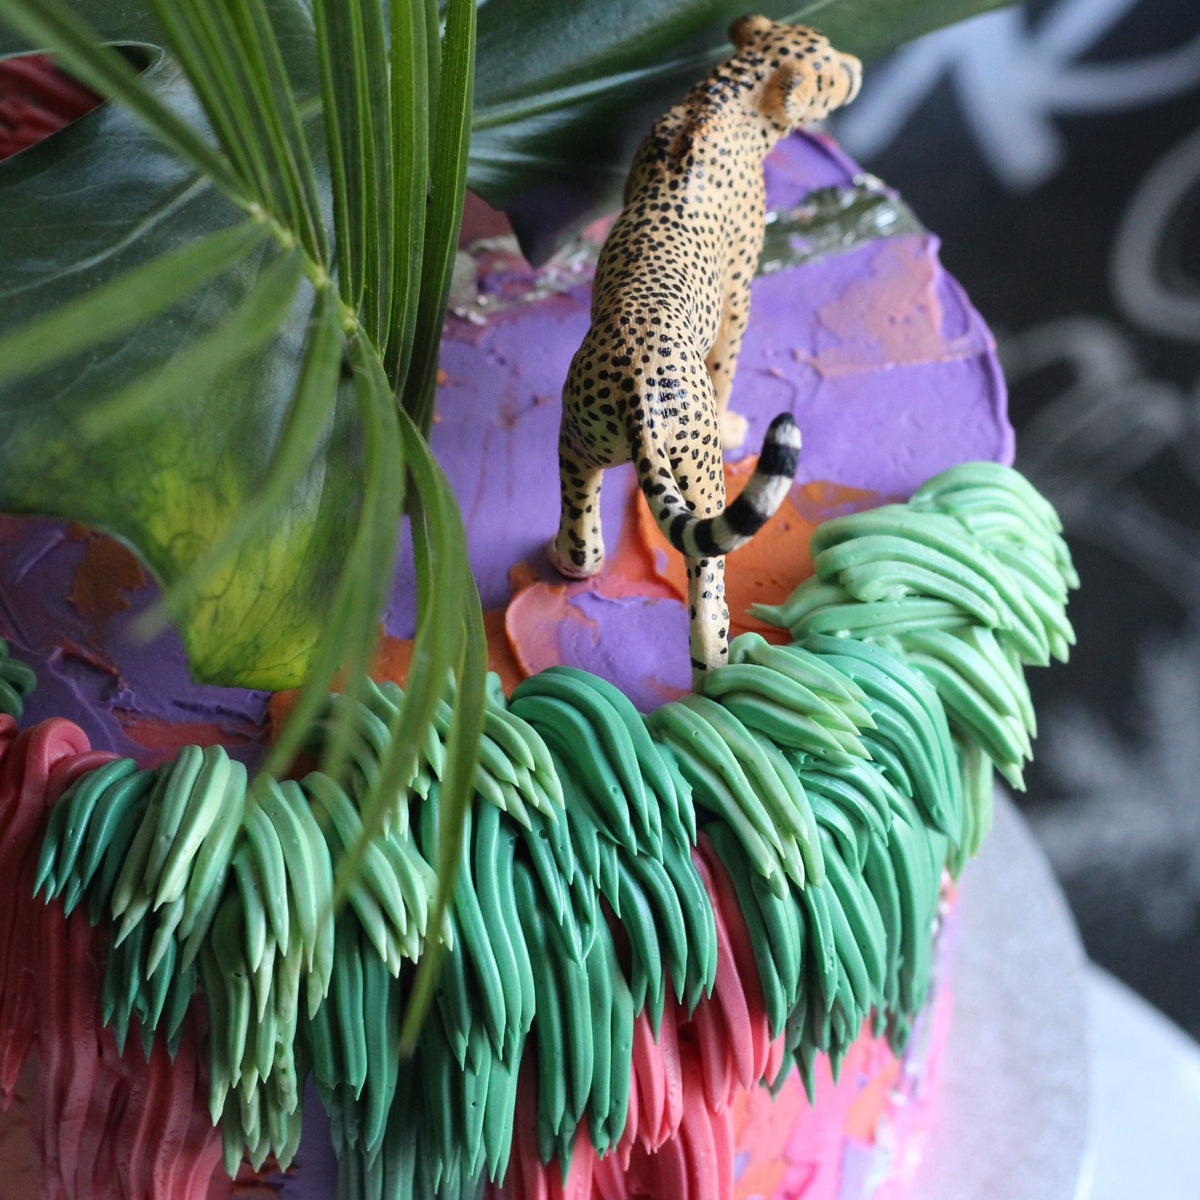 Utopia Cake - Bold colored icing and shaggy cream adorned with green leaves and a cheetah topper.